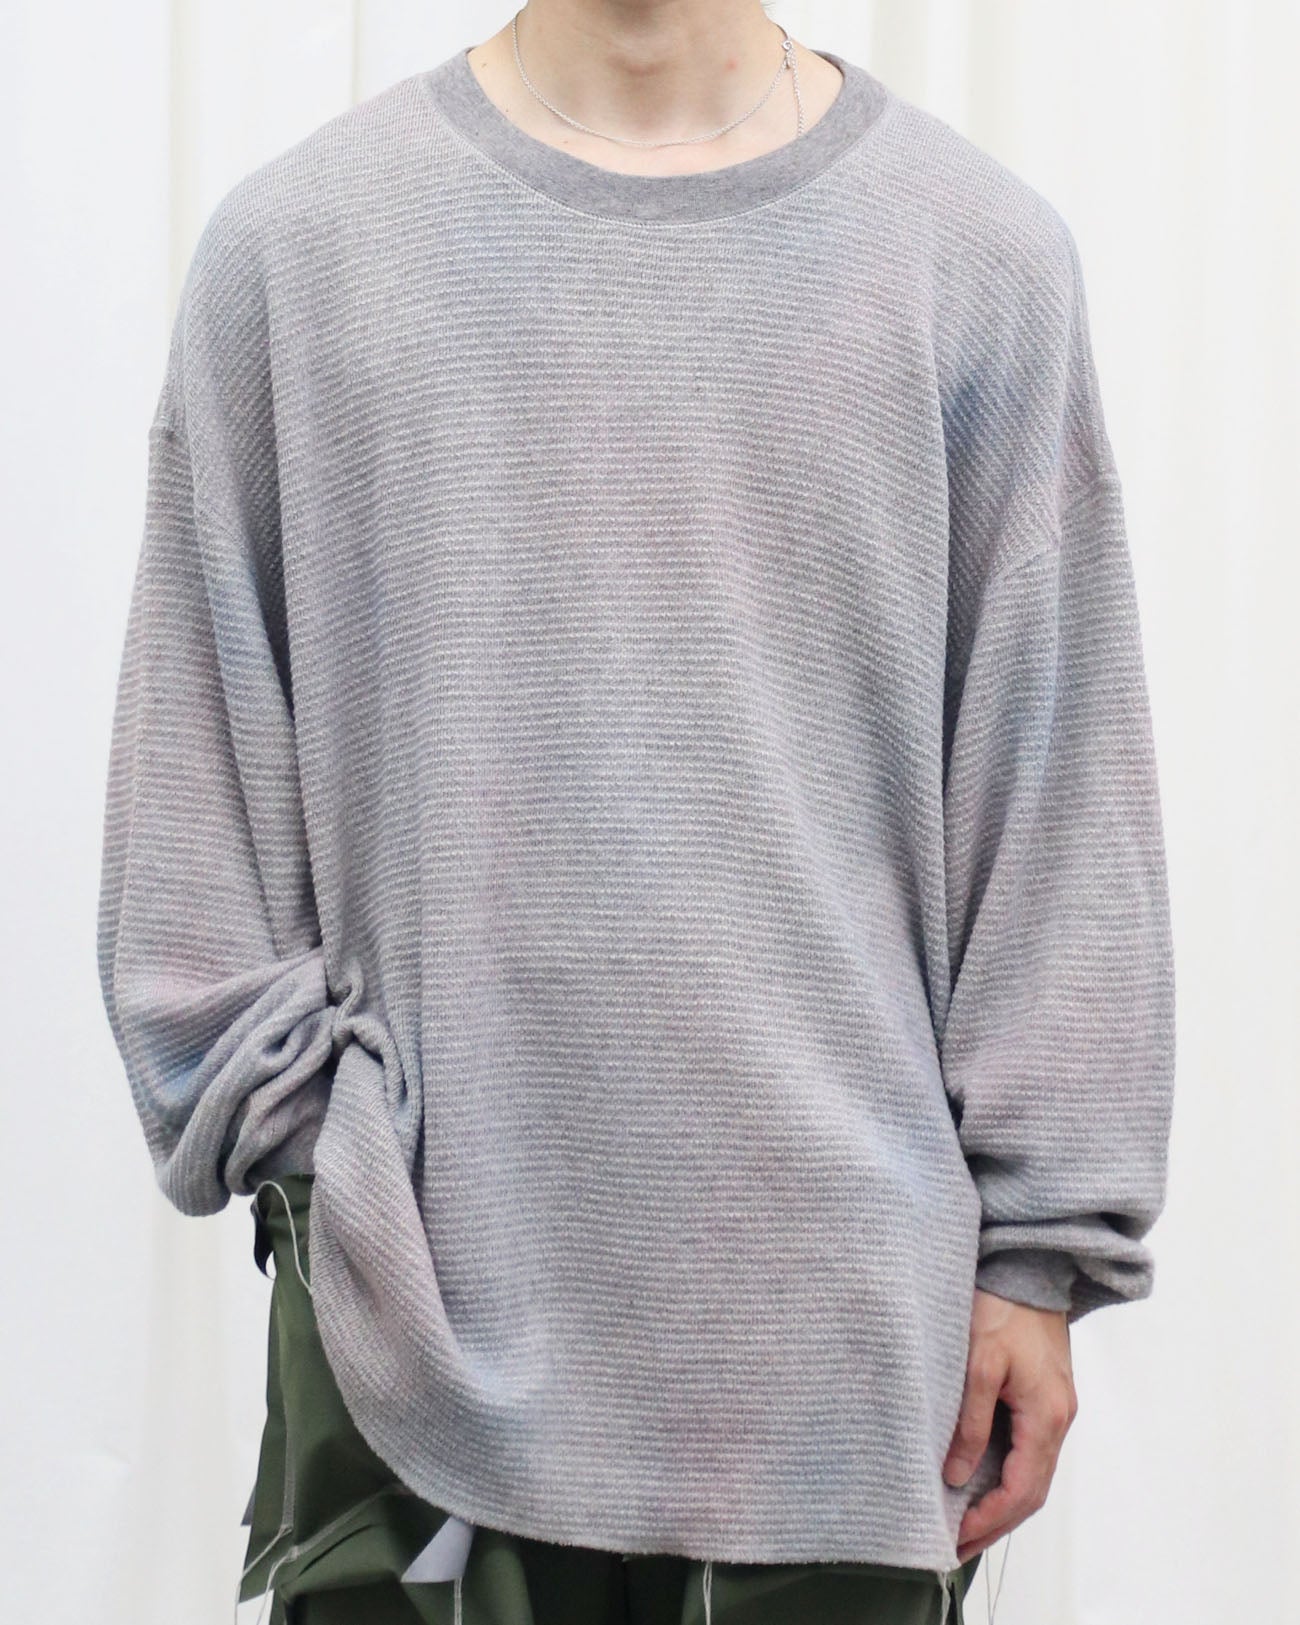 Two Fade Yak/Co Thermal L/S - gray